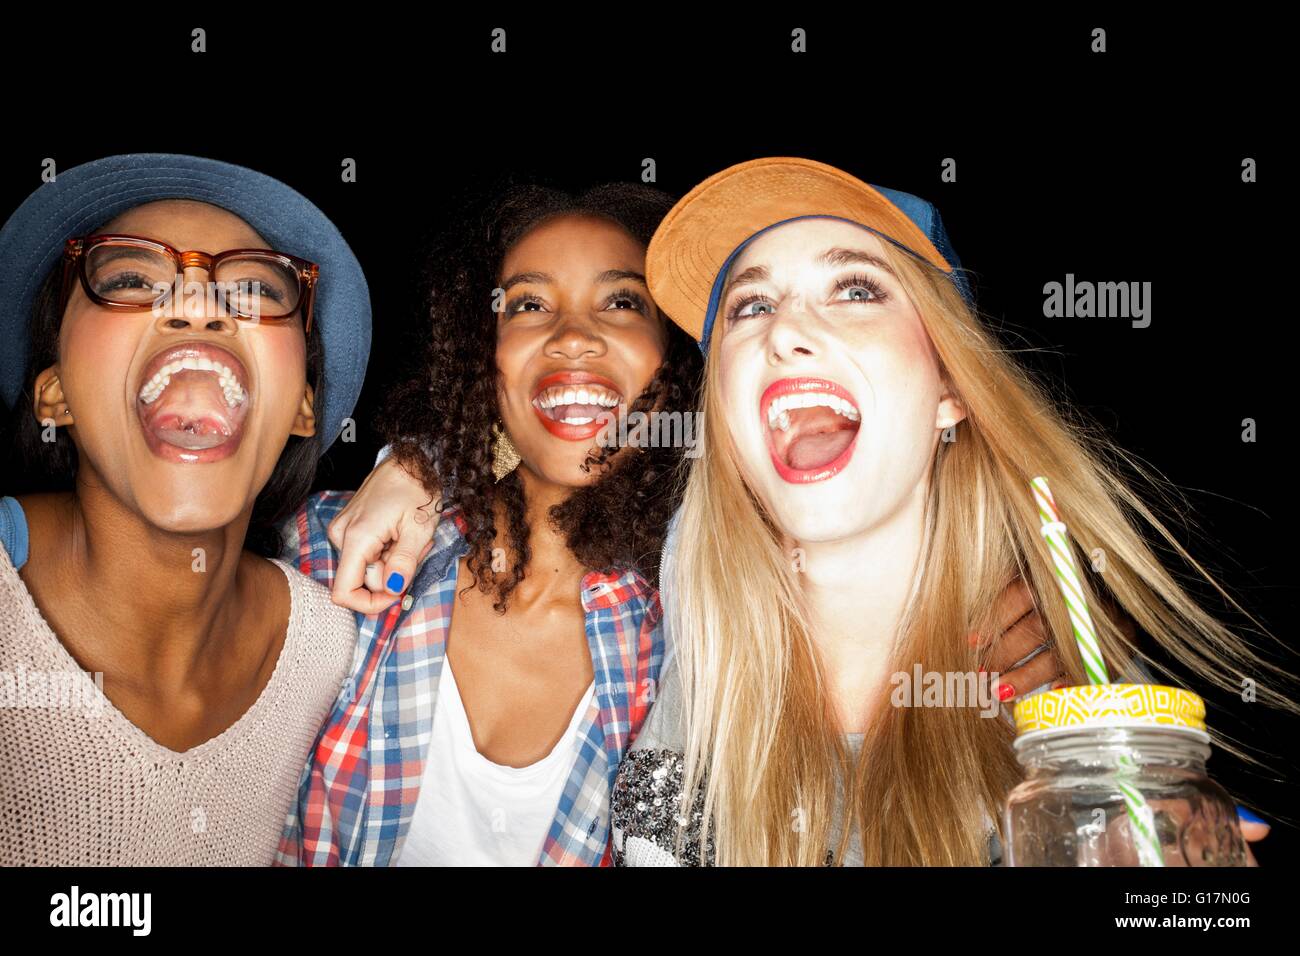 Young women huddled together looking up, mouths open smiling Stock Photo